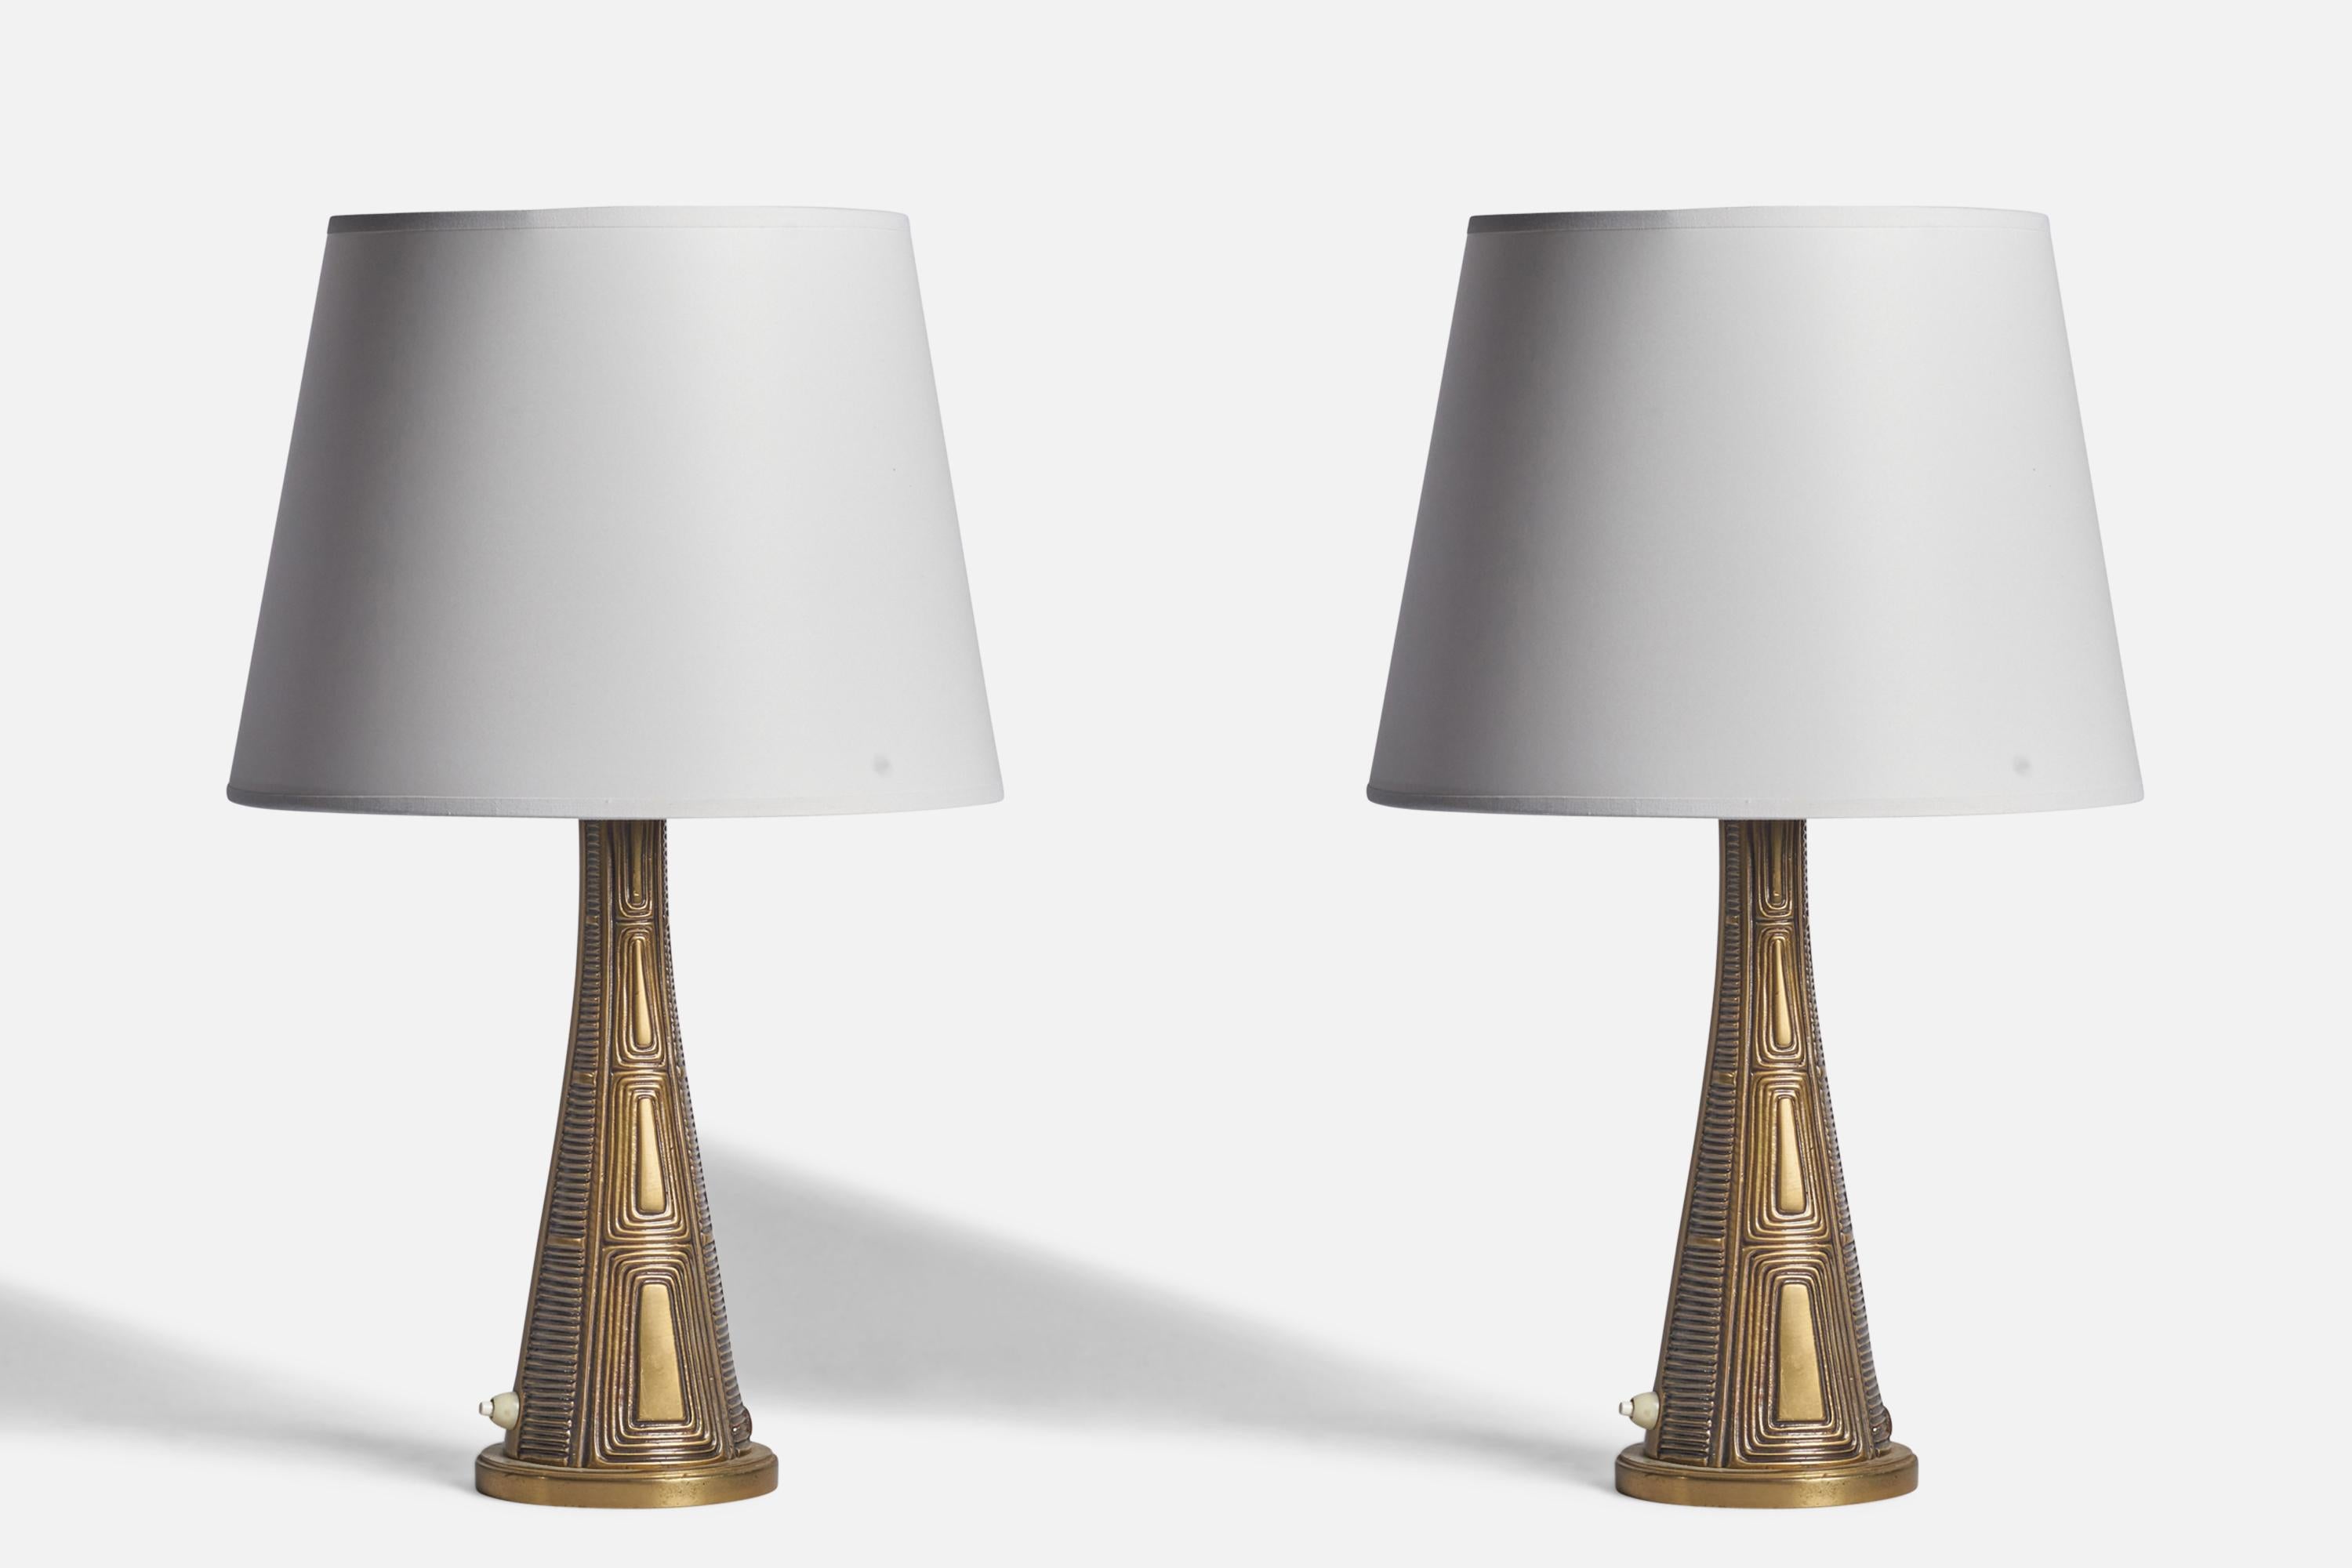 A pair of brass table lamps designed by Sonja Katzin and produced by ASEA, Sweden, c. 1940s.

Dimensions of Lamp (inches): 14.5” H x 4.6” Diameter
Dimensions of Shade (inches): 9” Top Diameter x 12” Bottom Diameter x 9” H
Dimensions of Lamp with